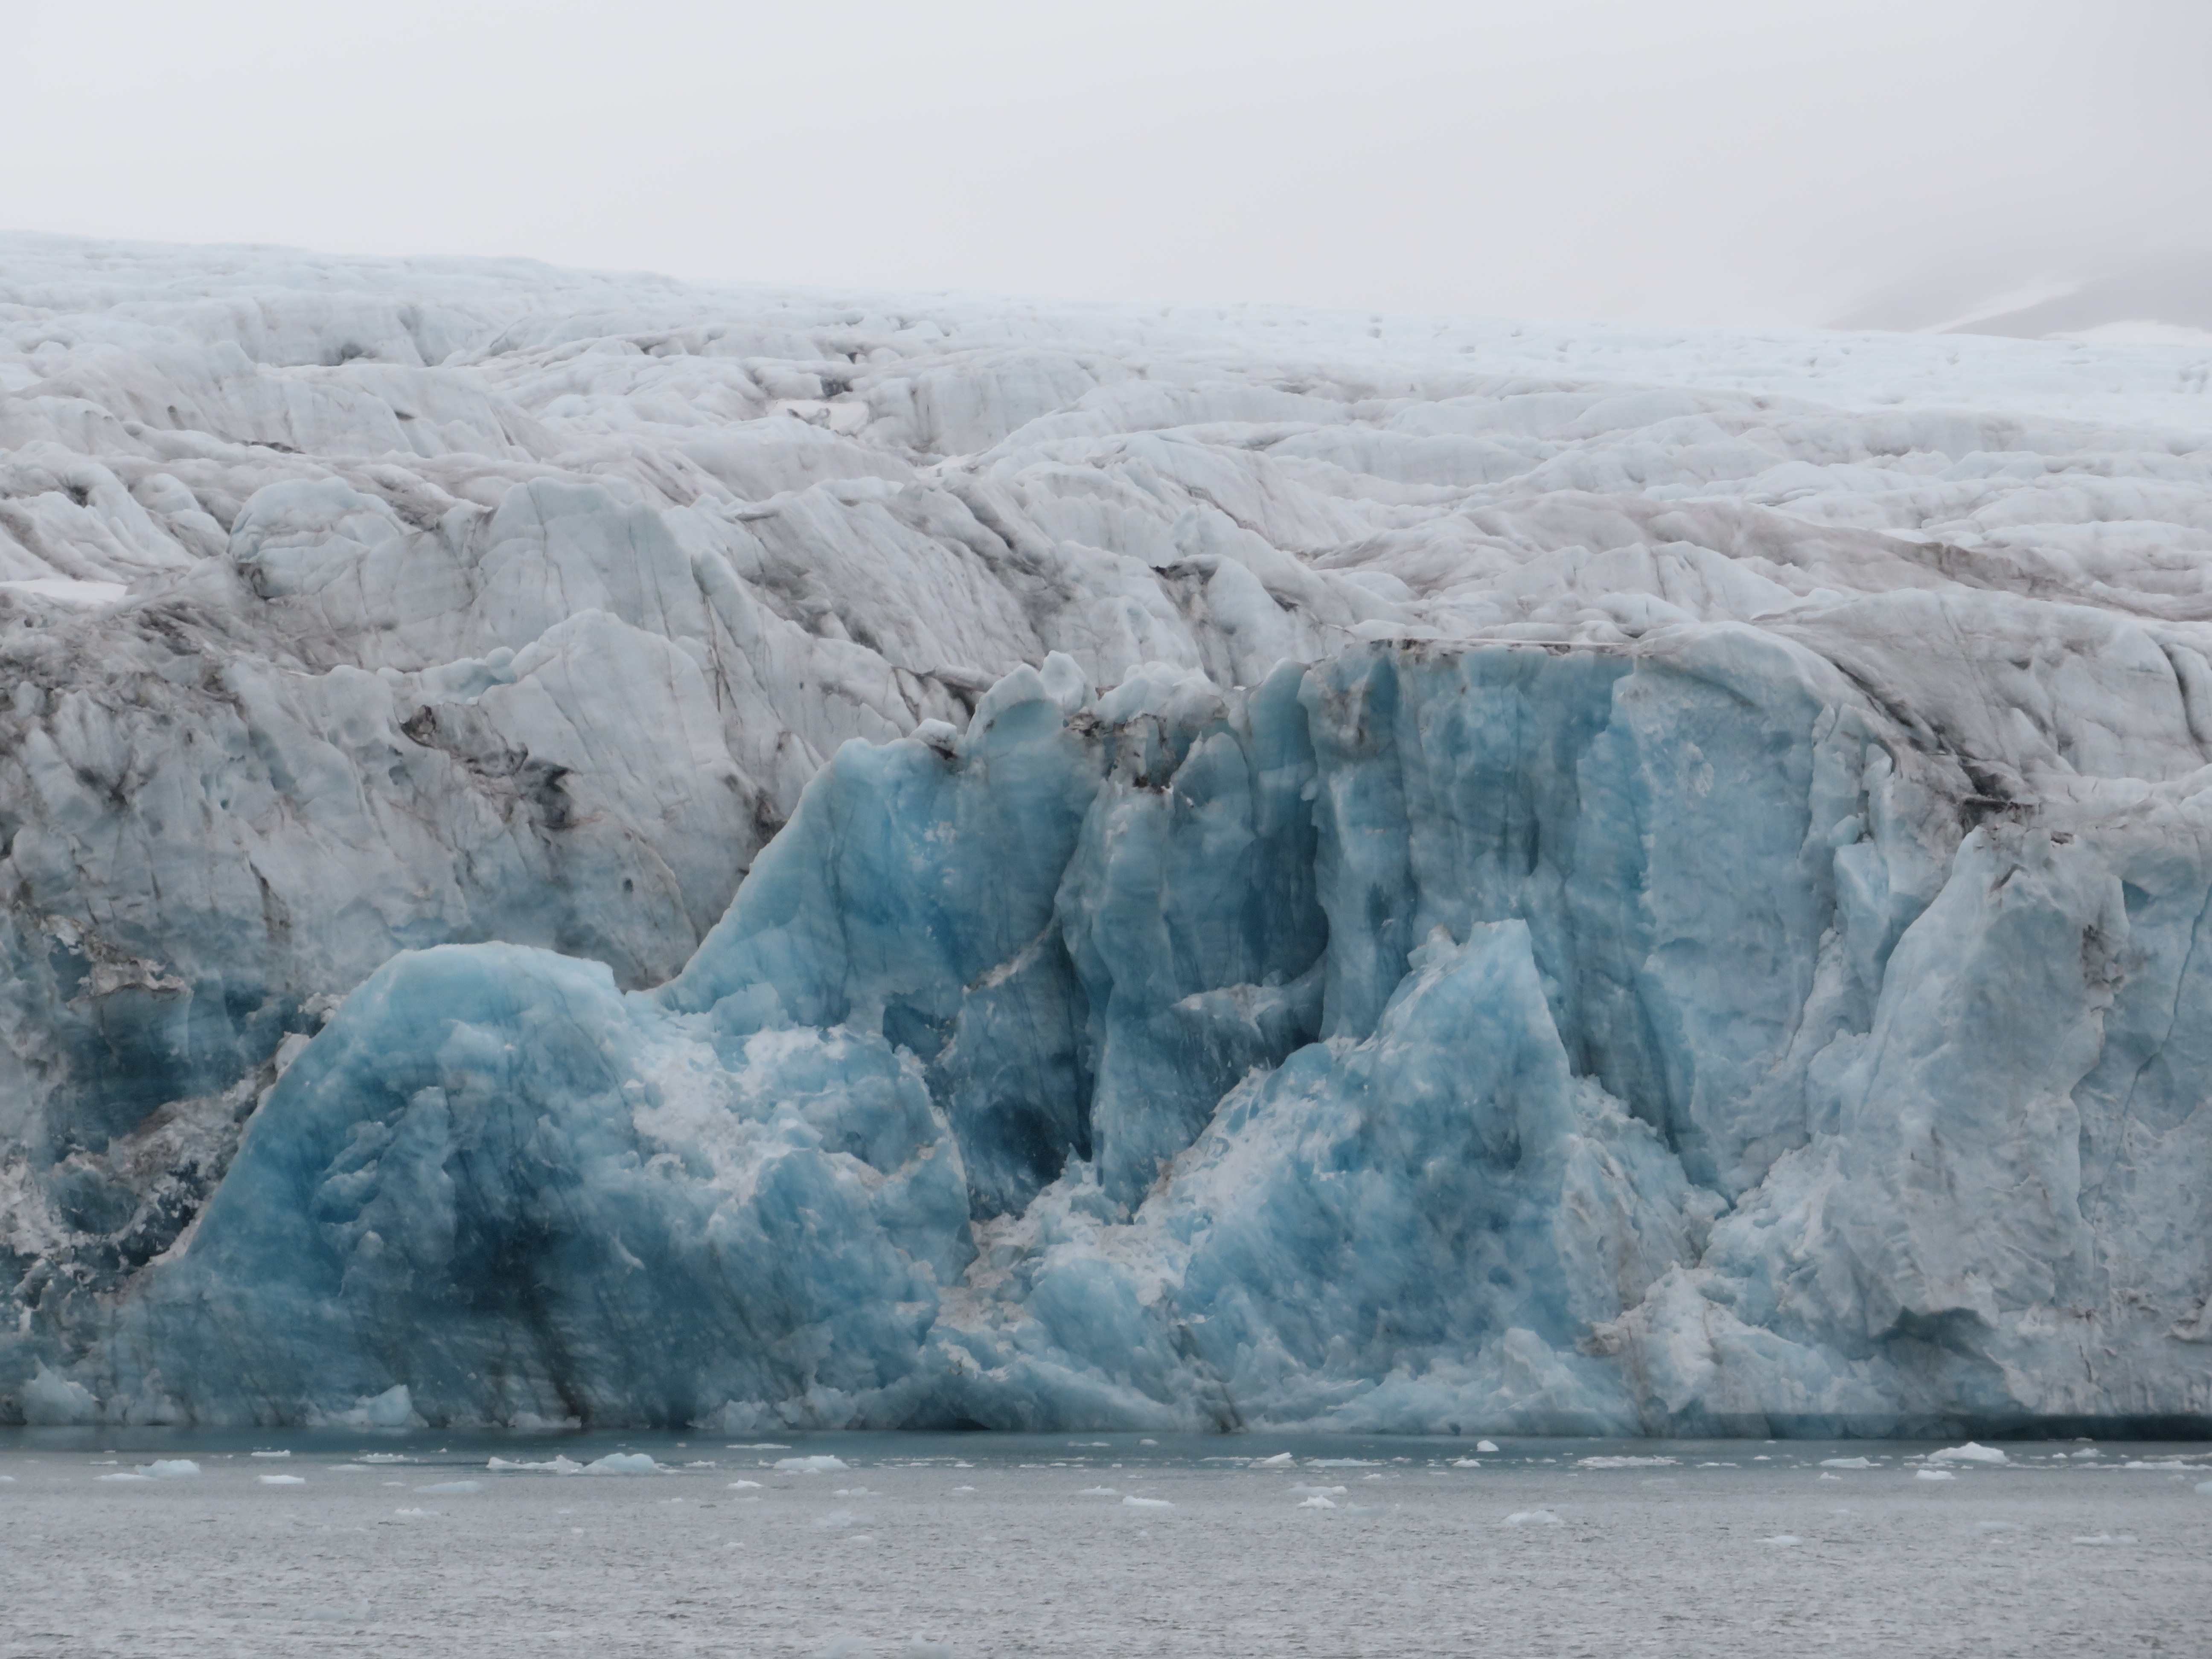 Calving events reveal pristine, blue ice at Hansbreen, Svalbard.